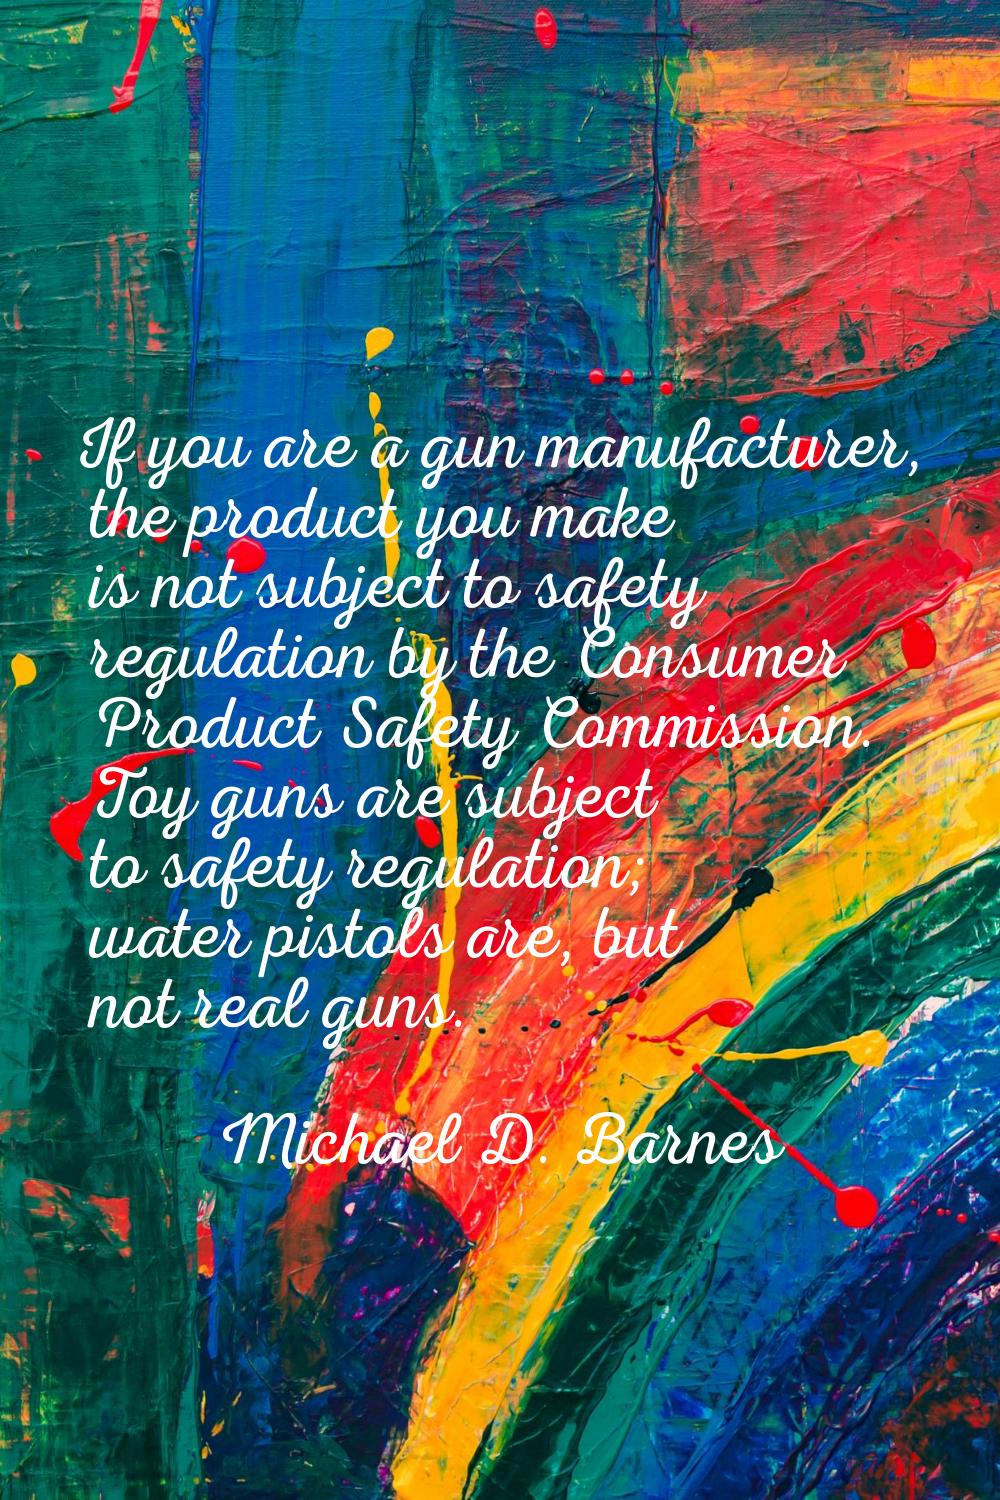 If you are a gun manufacturer, the product you make is not subject to safety regulation by the Cons